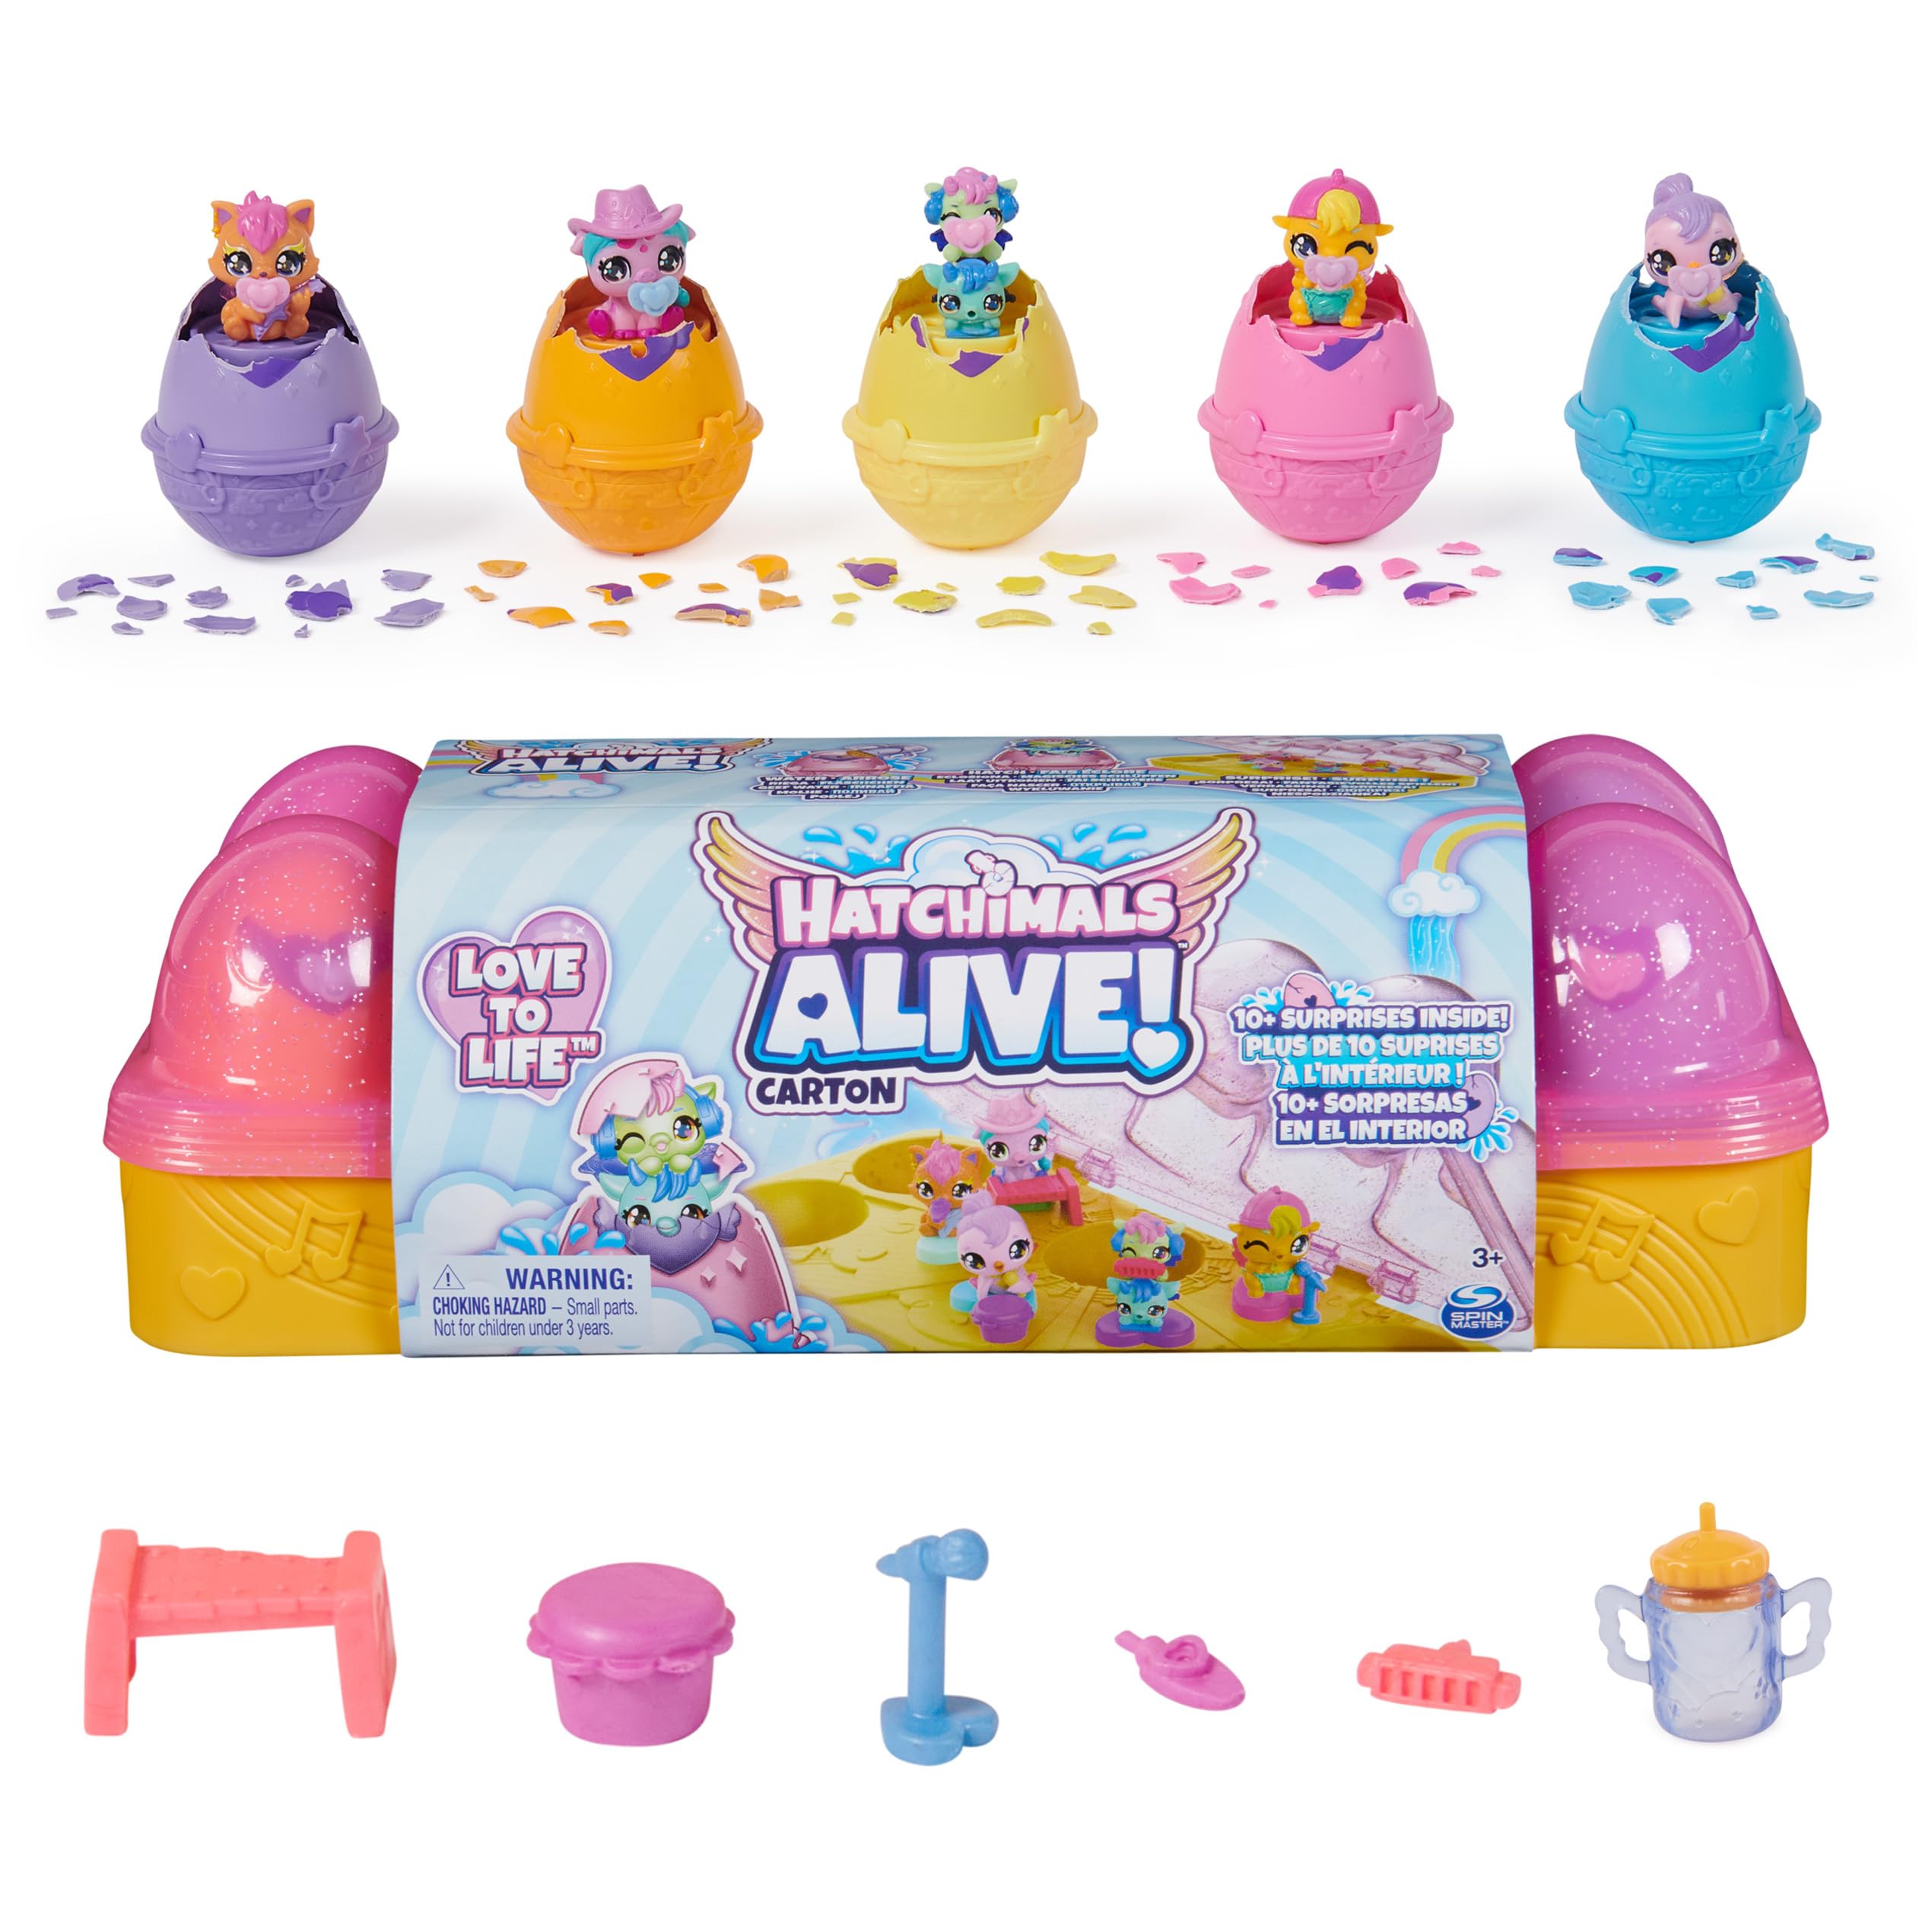 Hatchimals Alive, Pink & Yellow Egg Carton Toy with 6 Mini Figures in Self-Hatching Eggs, 11 Accessories, Kids Toys for Girls and Boys Ages 3 and up